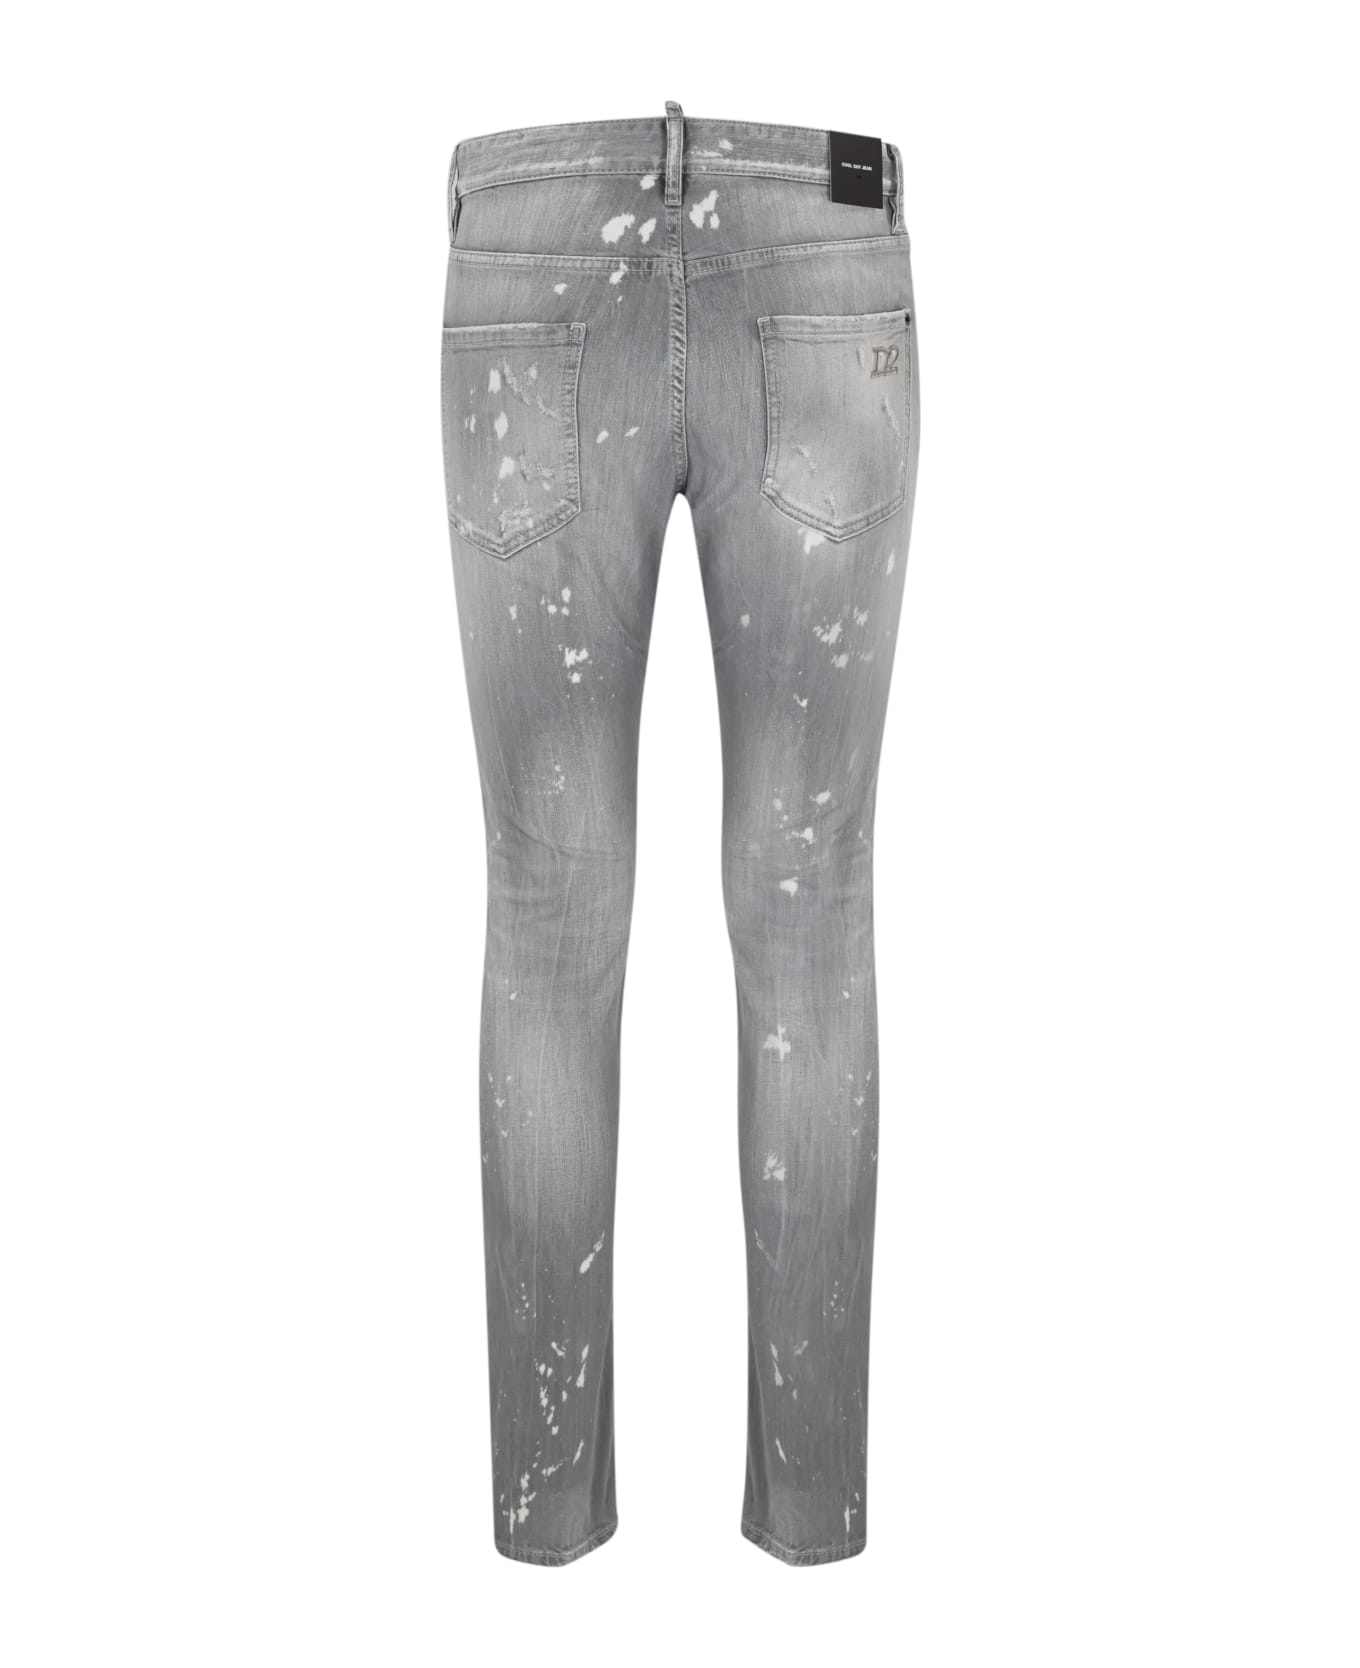 Dsquared2 Cool Guy Jeans - Grigio ボトムス